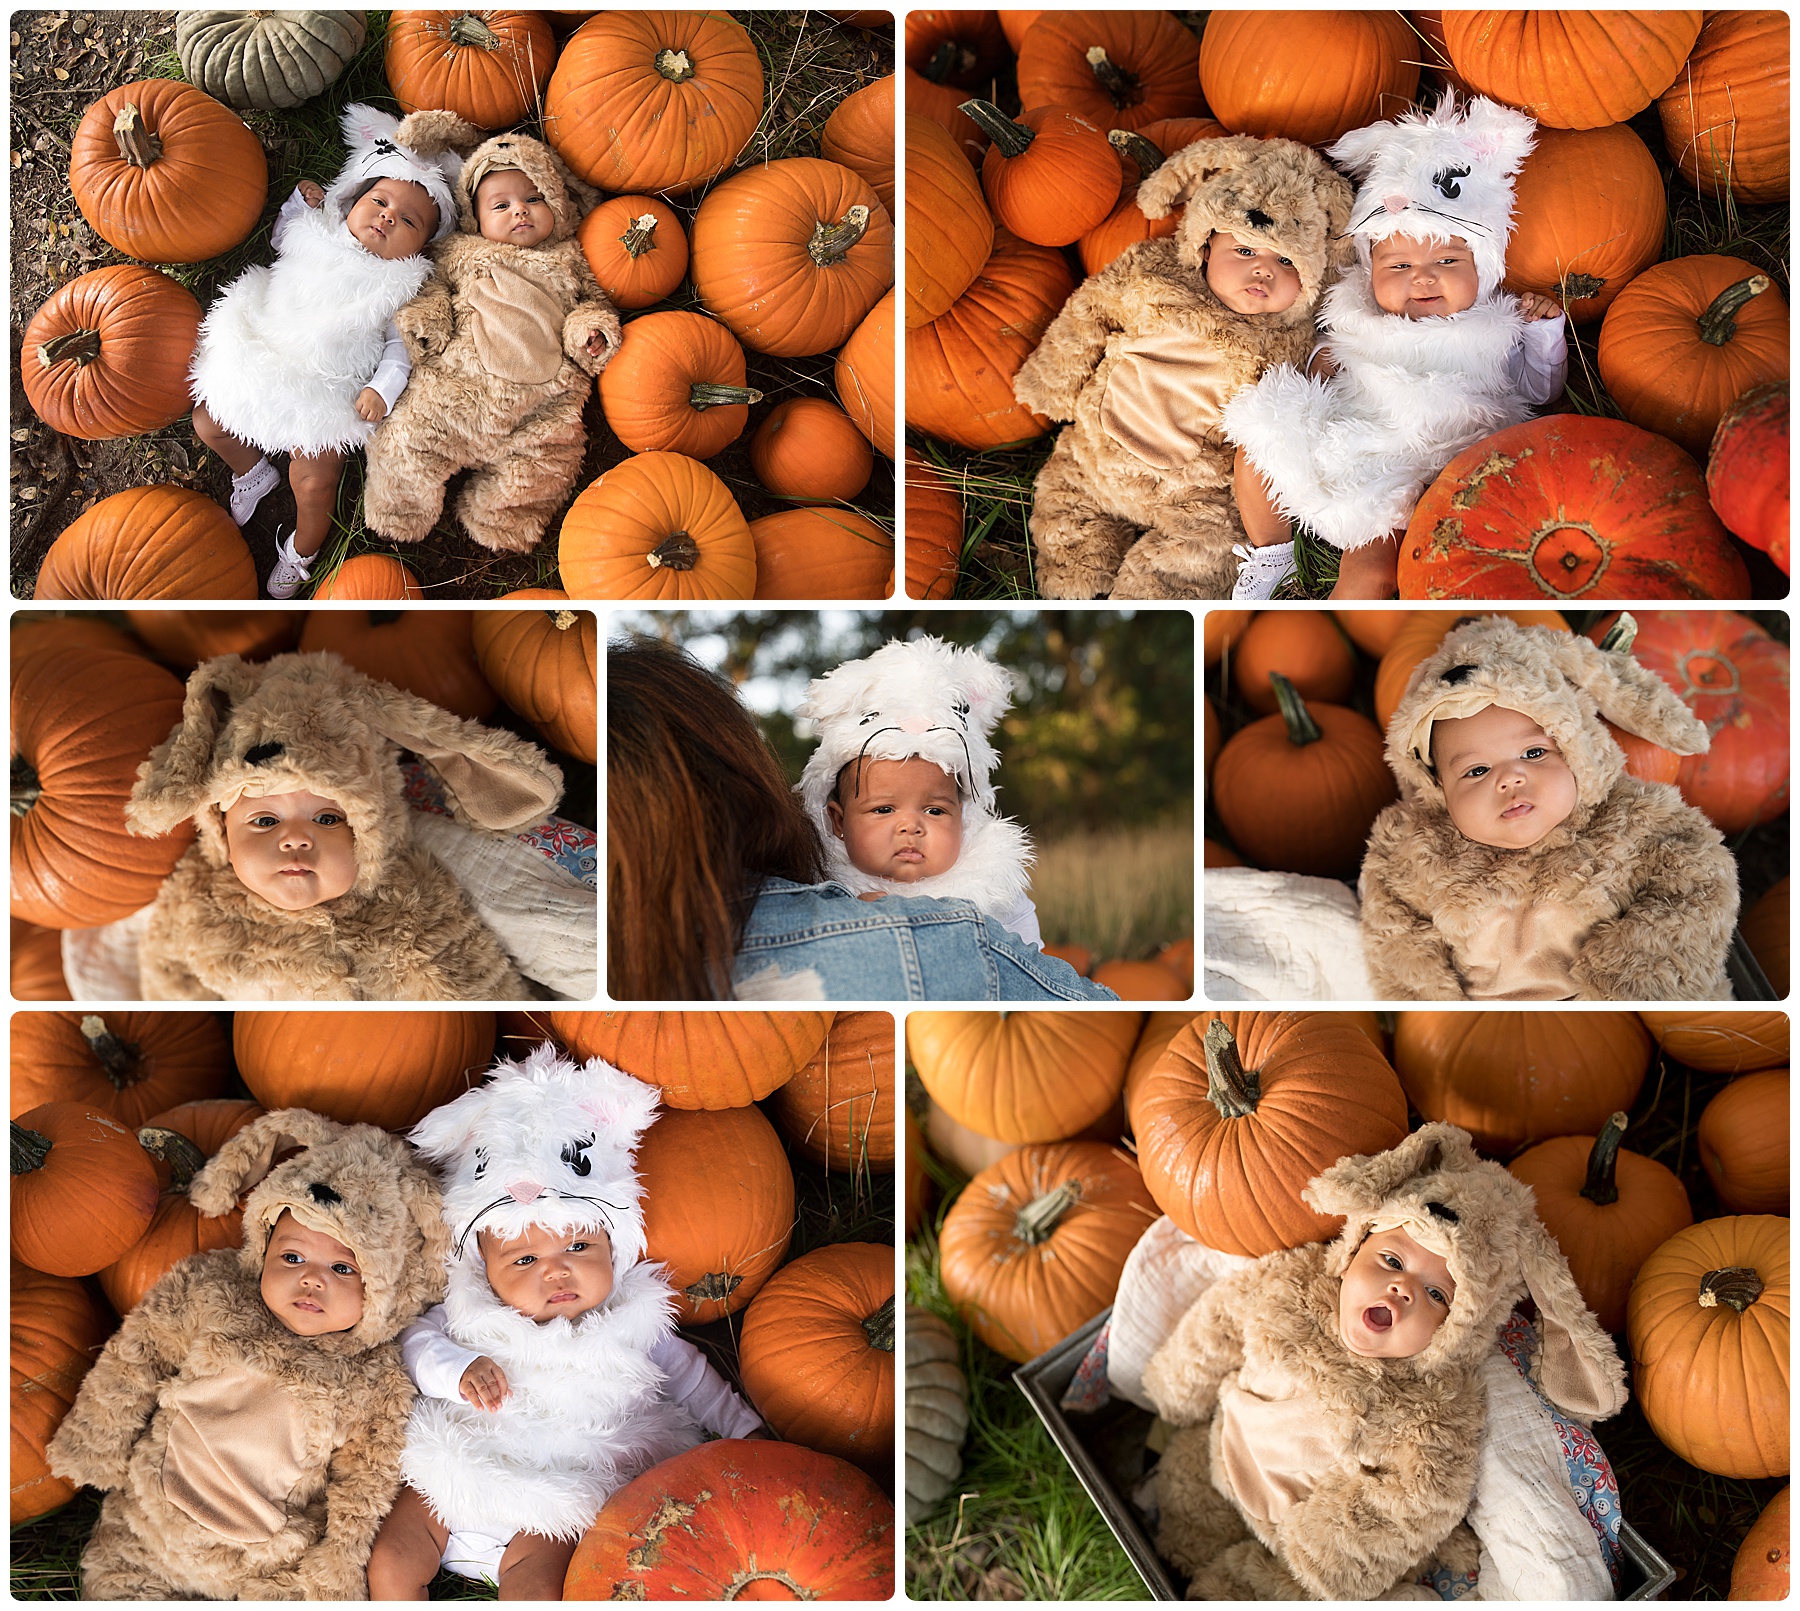 twin babies in their halloween costumes in the pumpkins